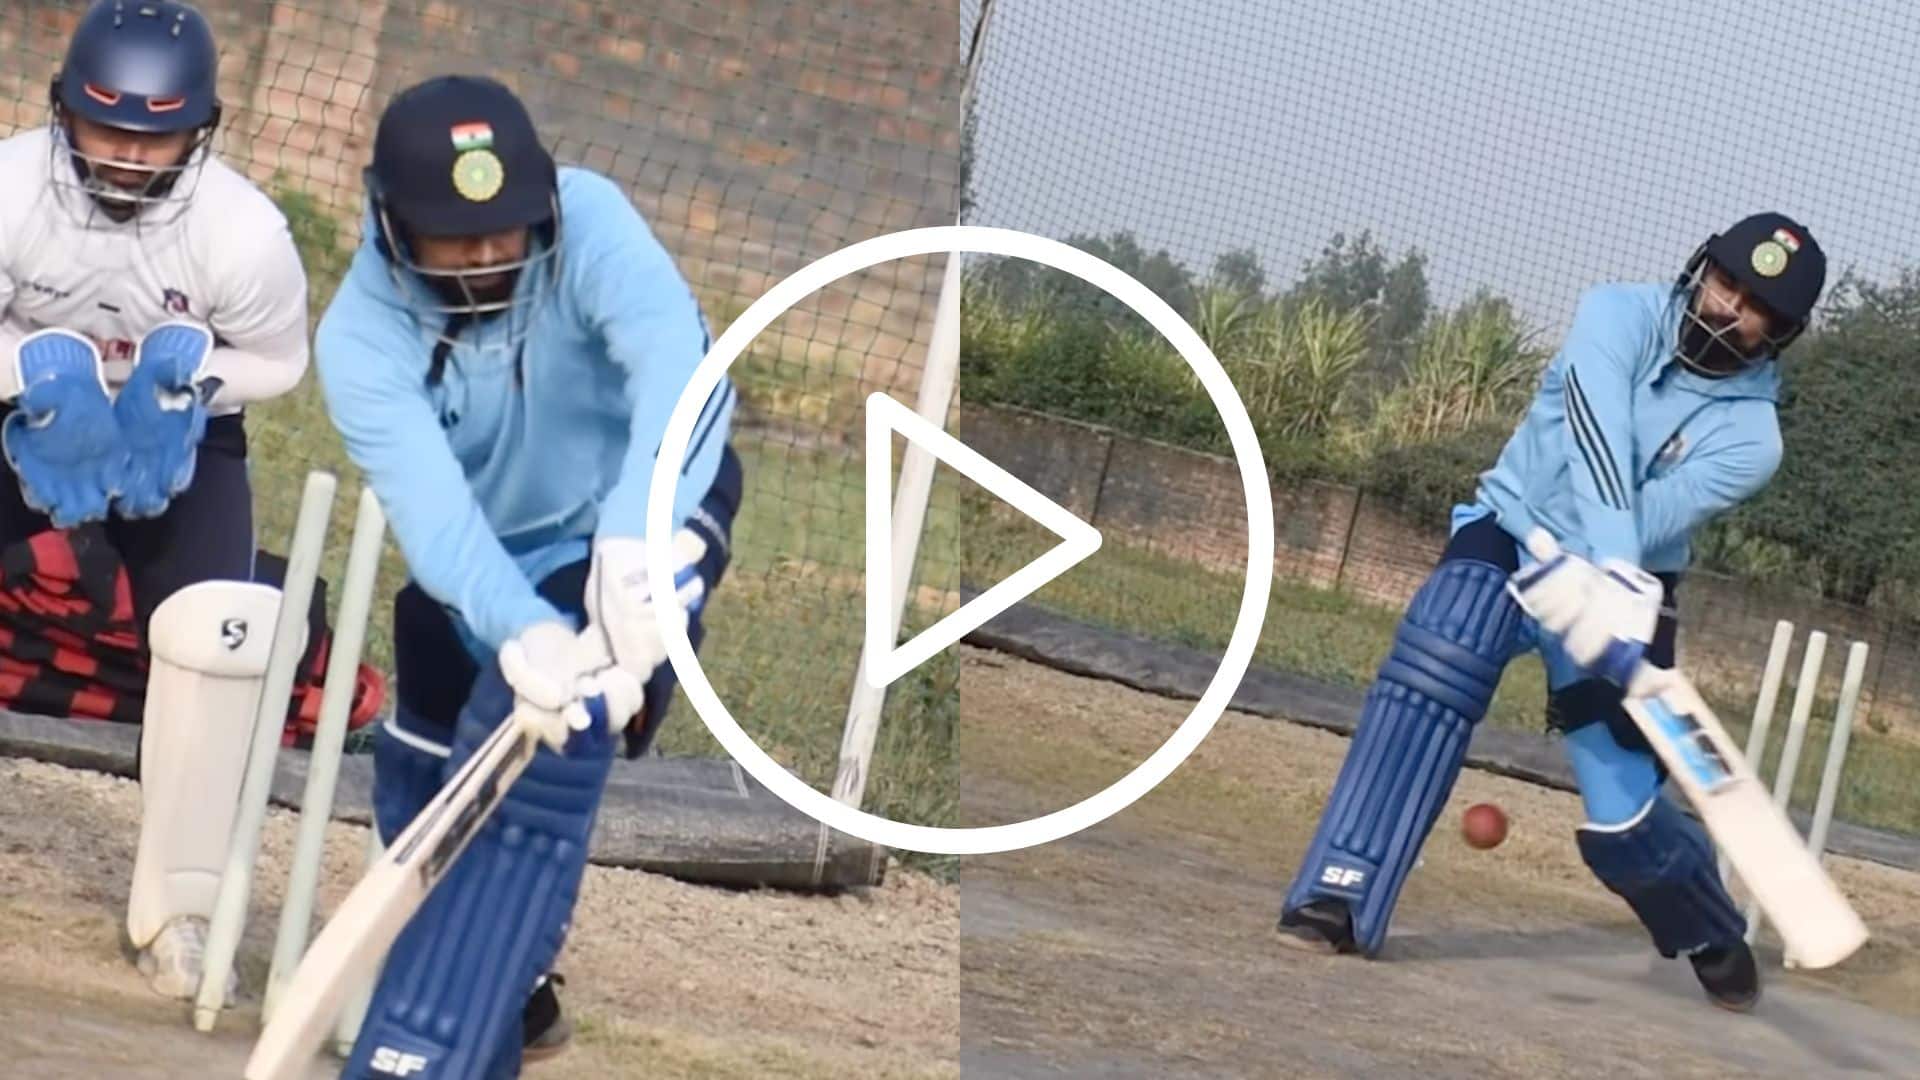 [Watch] Mohammad Shami Shows Off His Batting Prowess At Nets Ahead Of England Tests